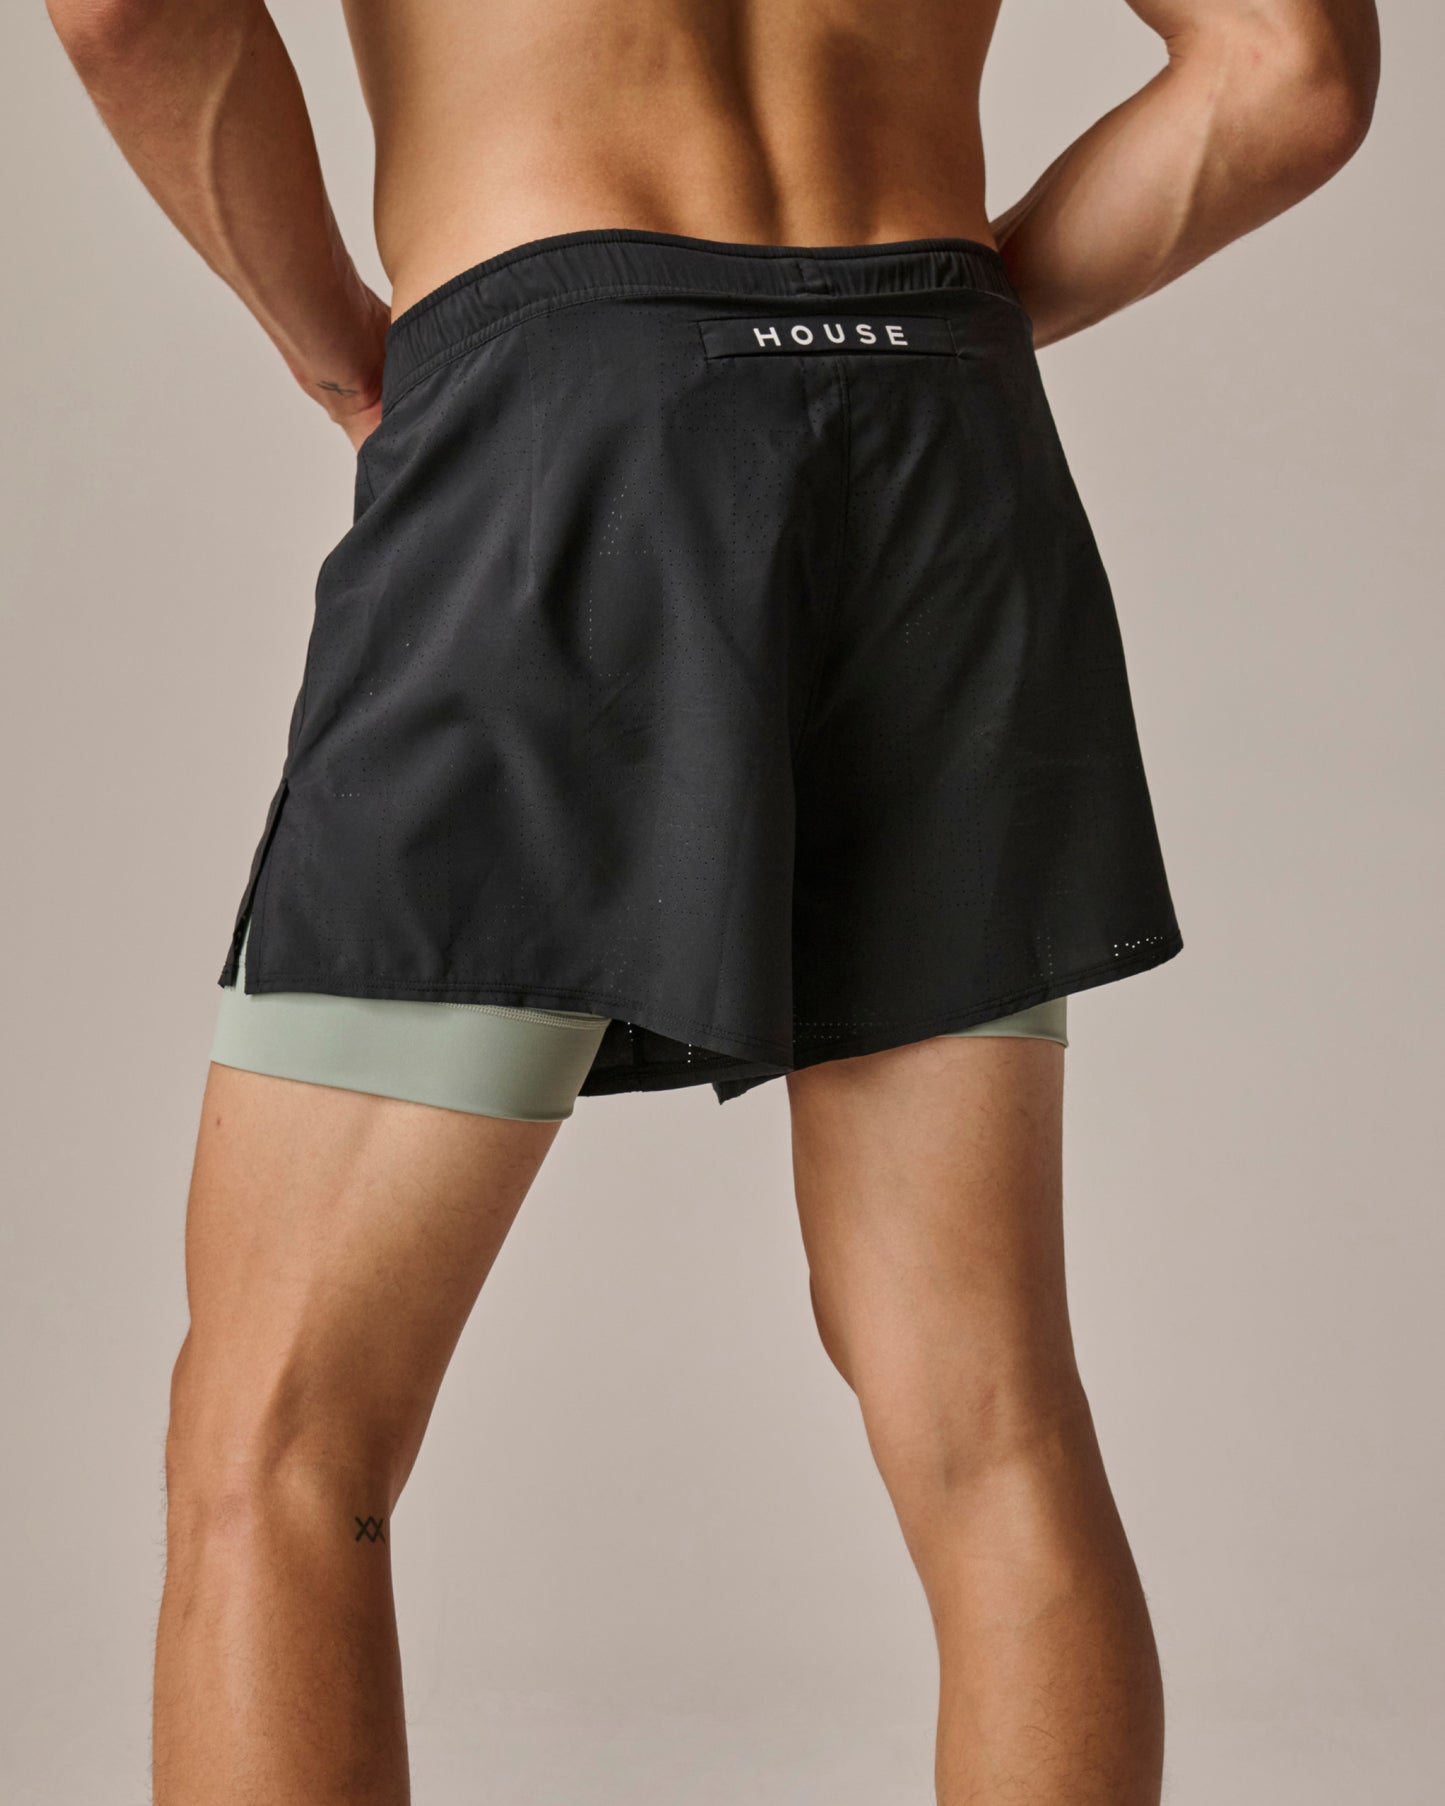 Perforated 4" Lined Short - Black/Sea Green